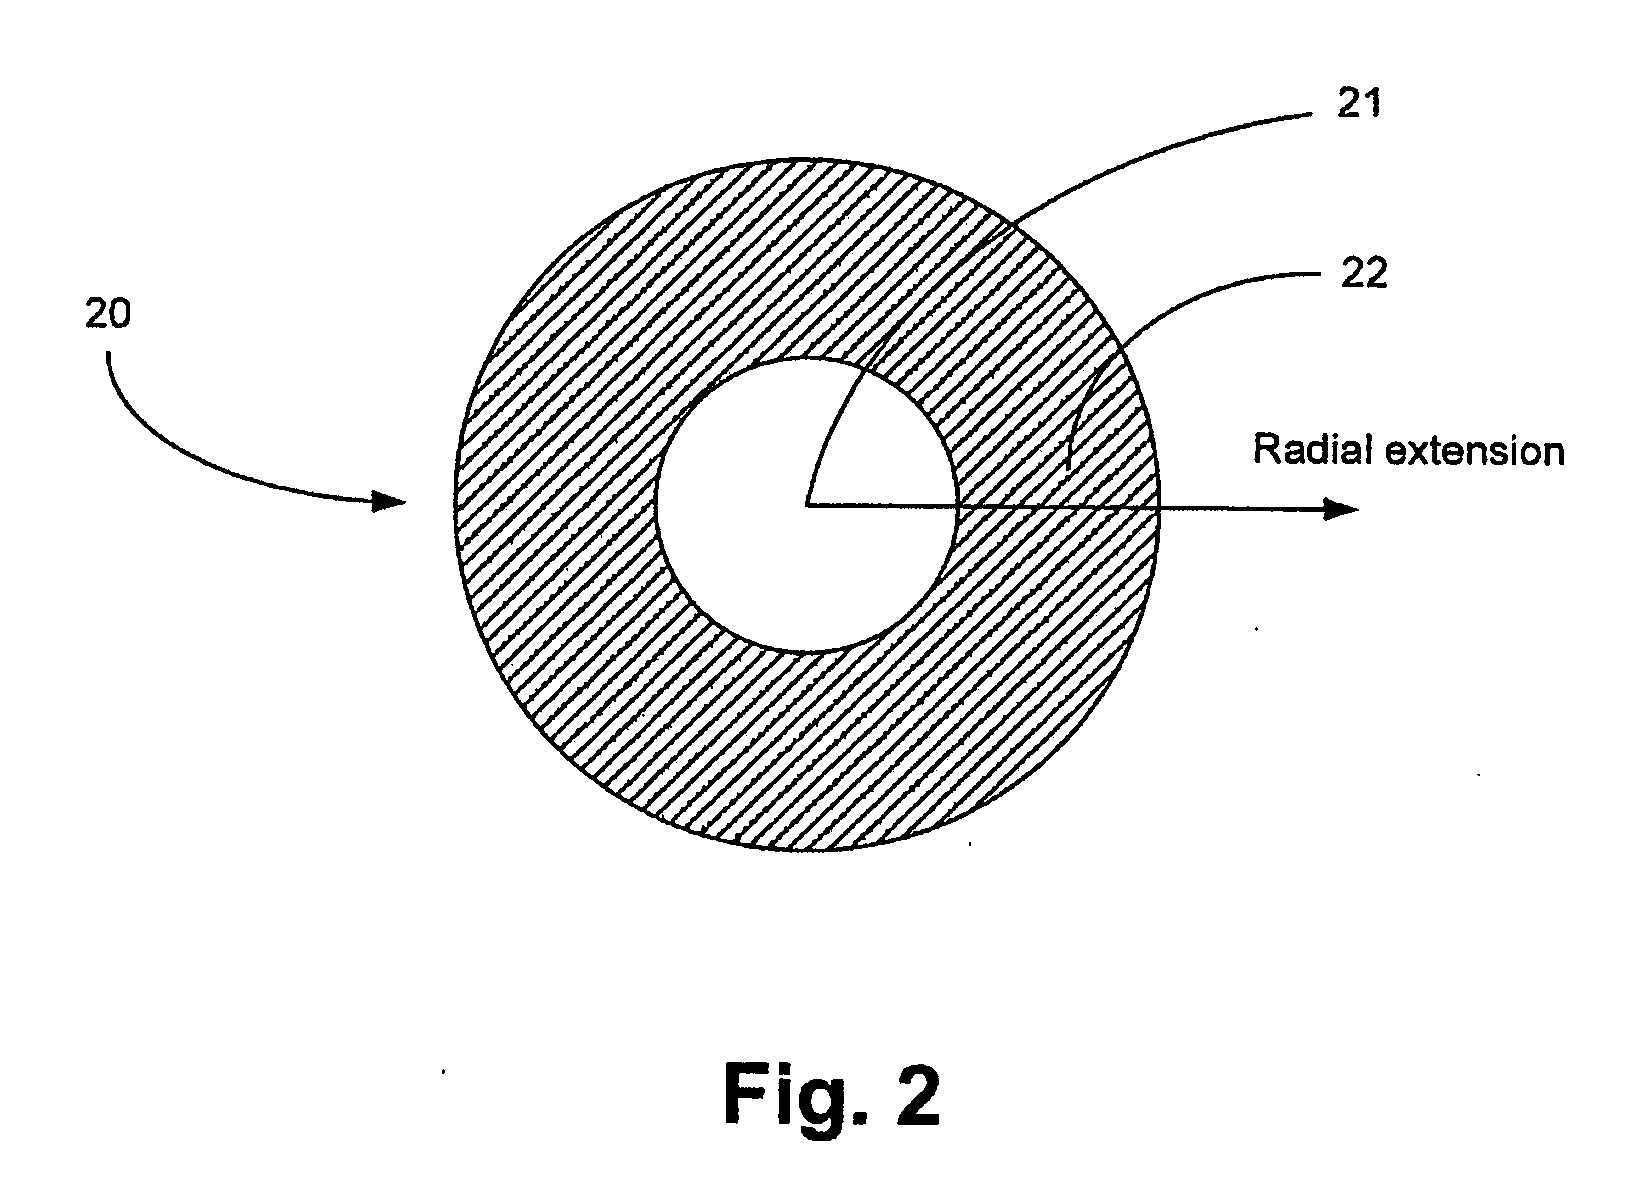 Light-controlling element for a camera